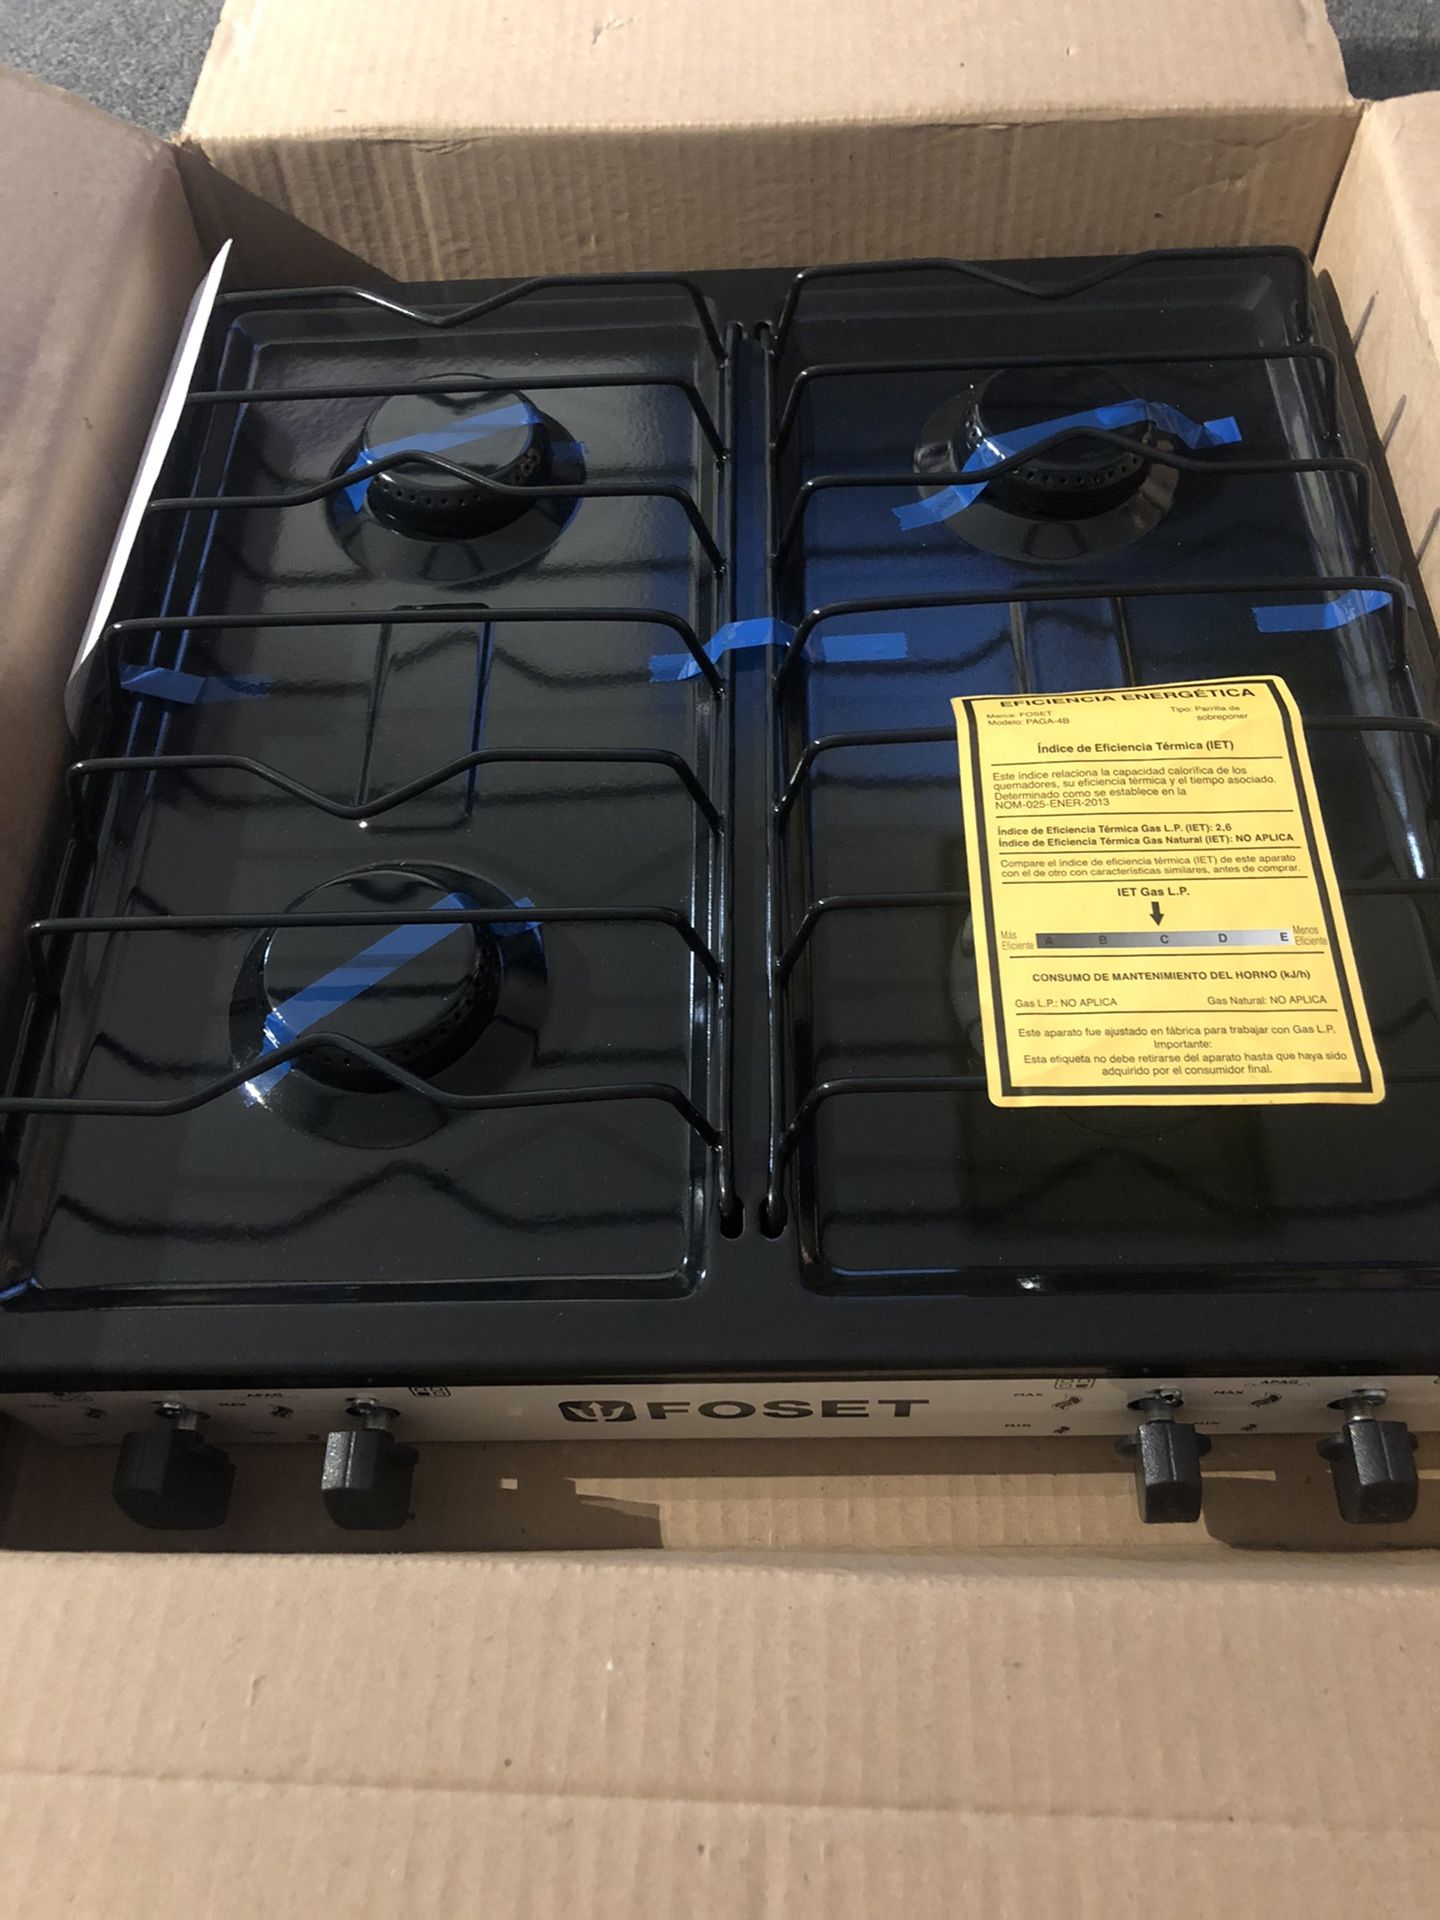 New cooktop gas stove